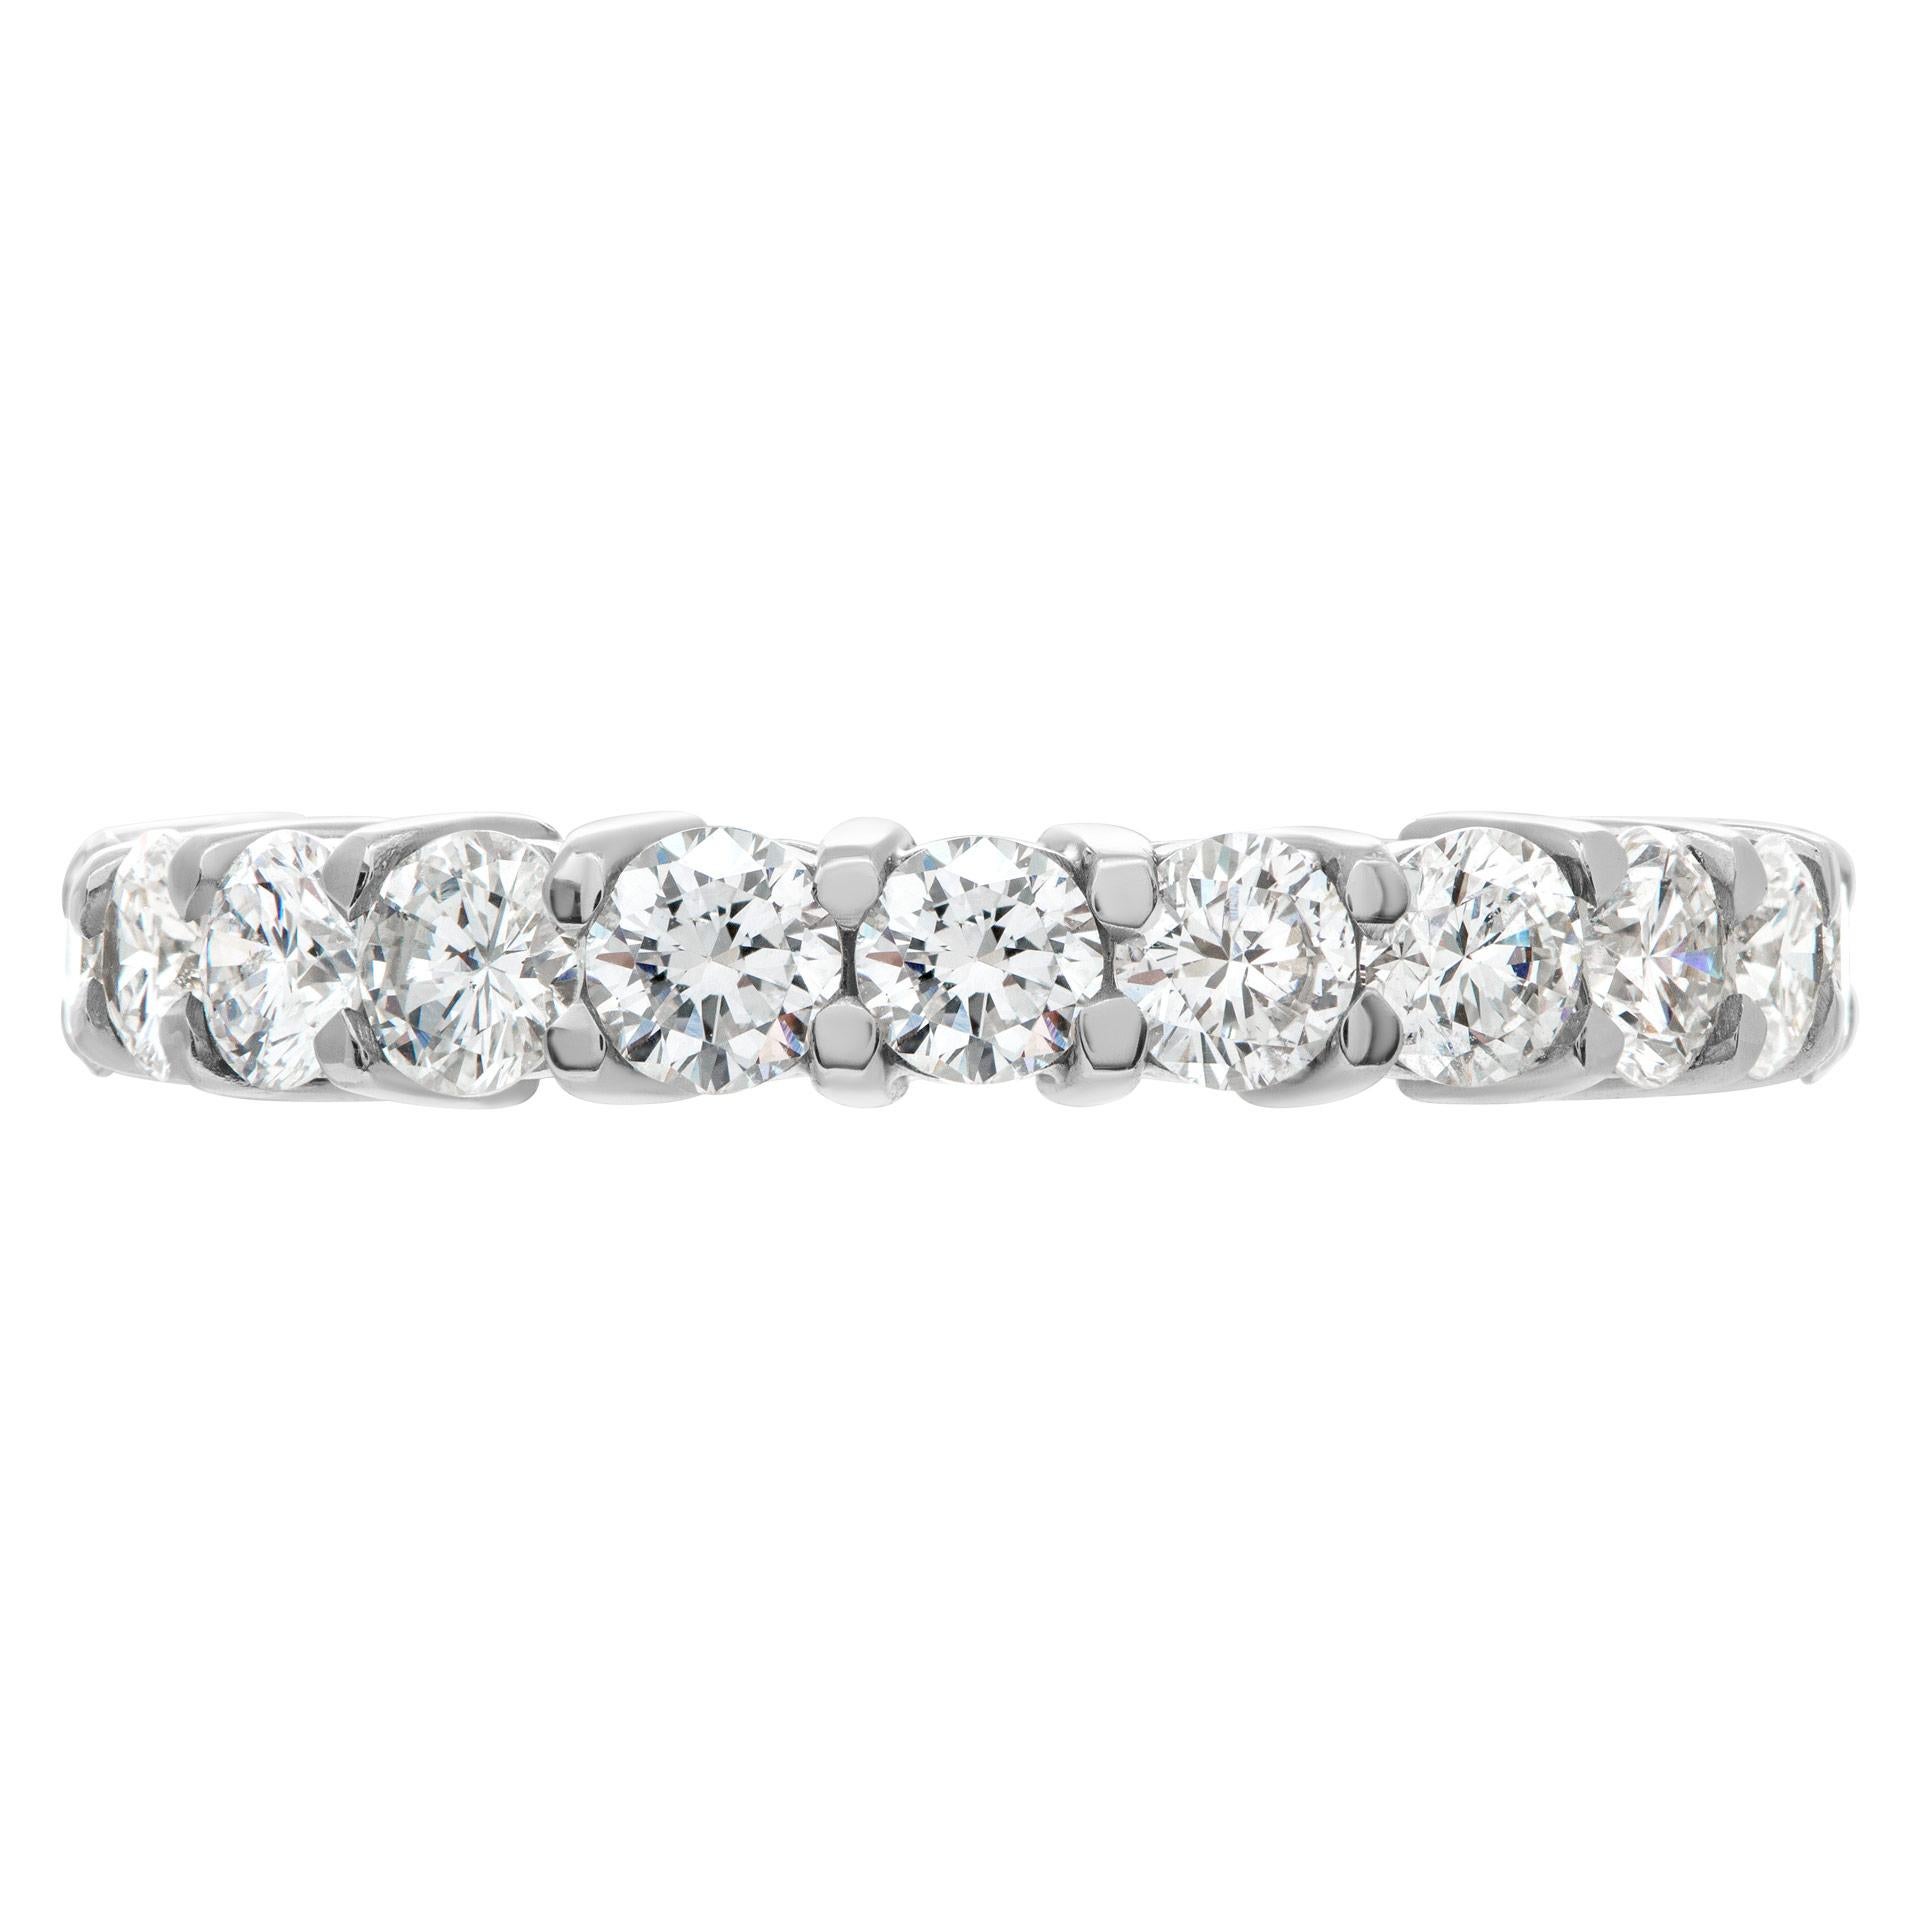 Diamond eternity band with 2.72 carats in round brilliant cut G-H color, VS-SI clarity diamonds (each diamond approximately 0.13 carat, 21 stones) set in platinum. Size 5.75
